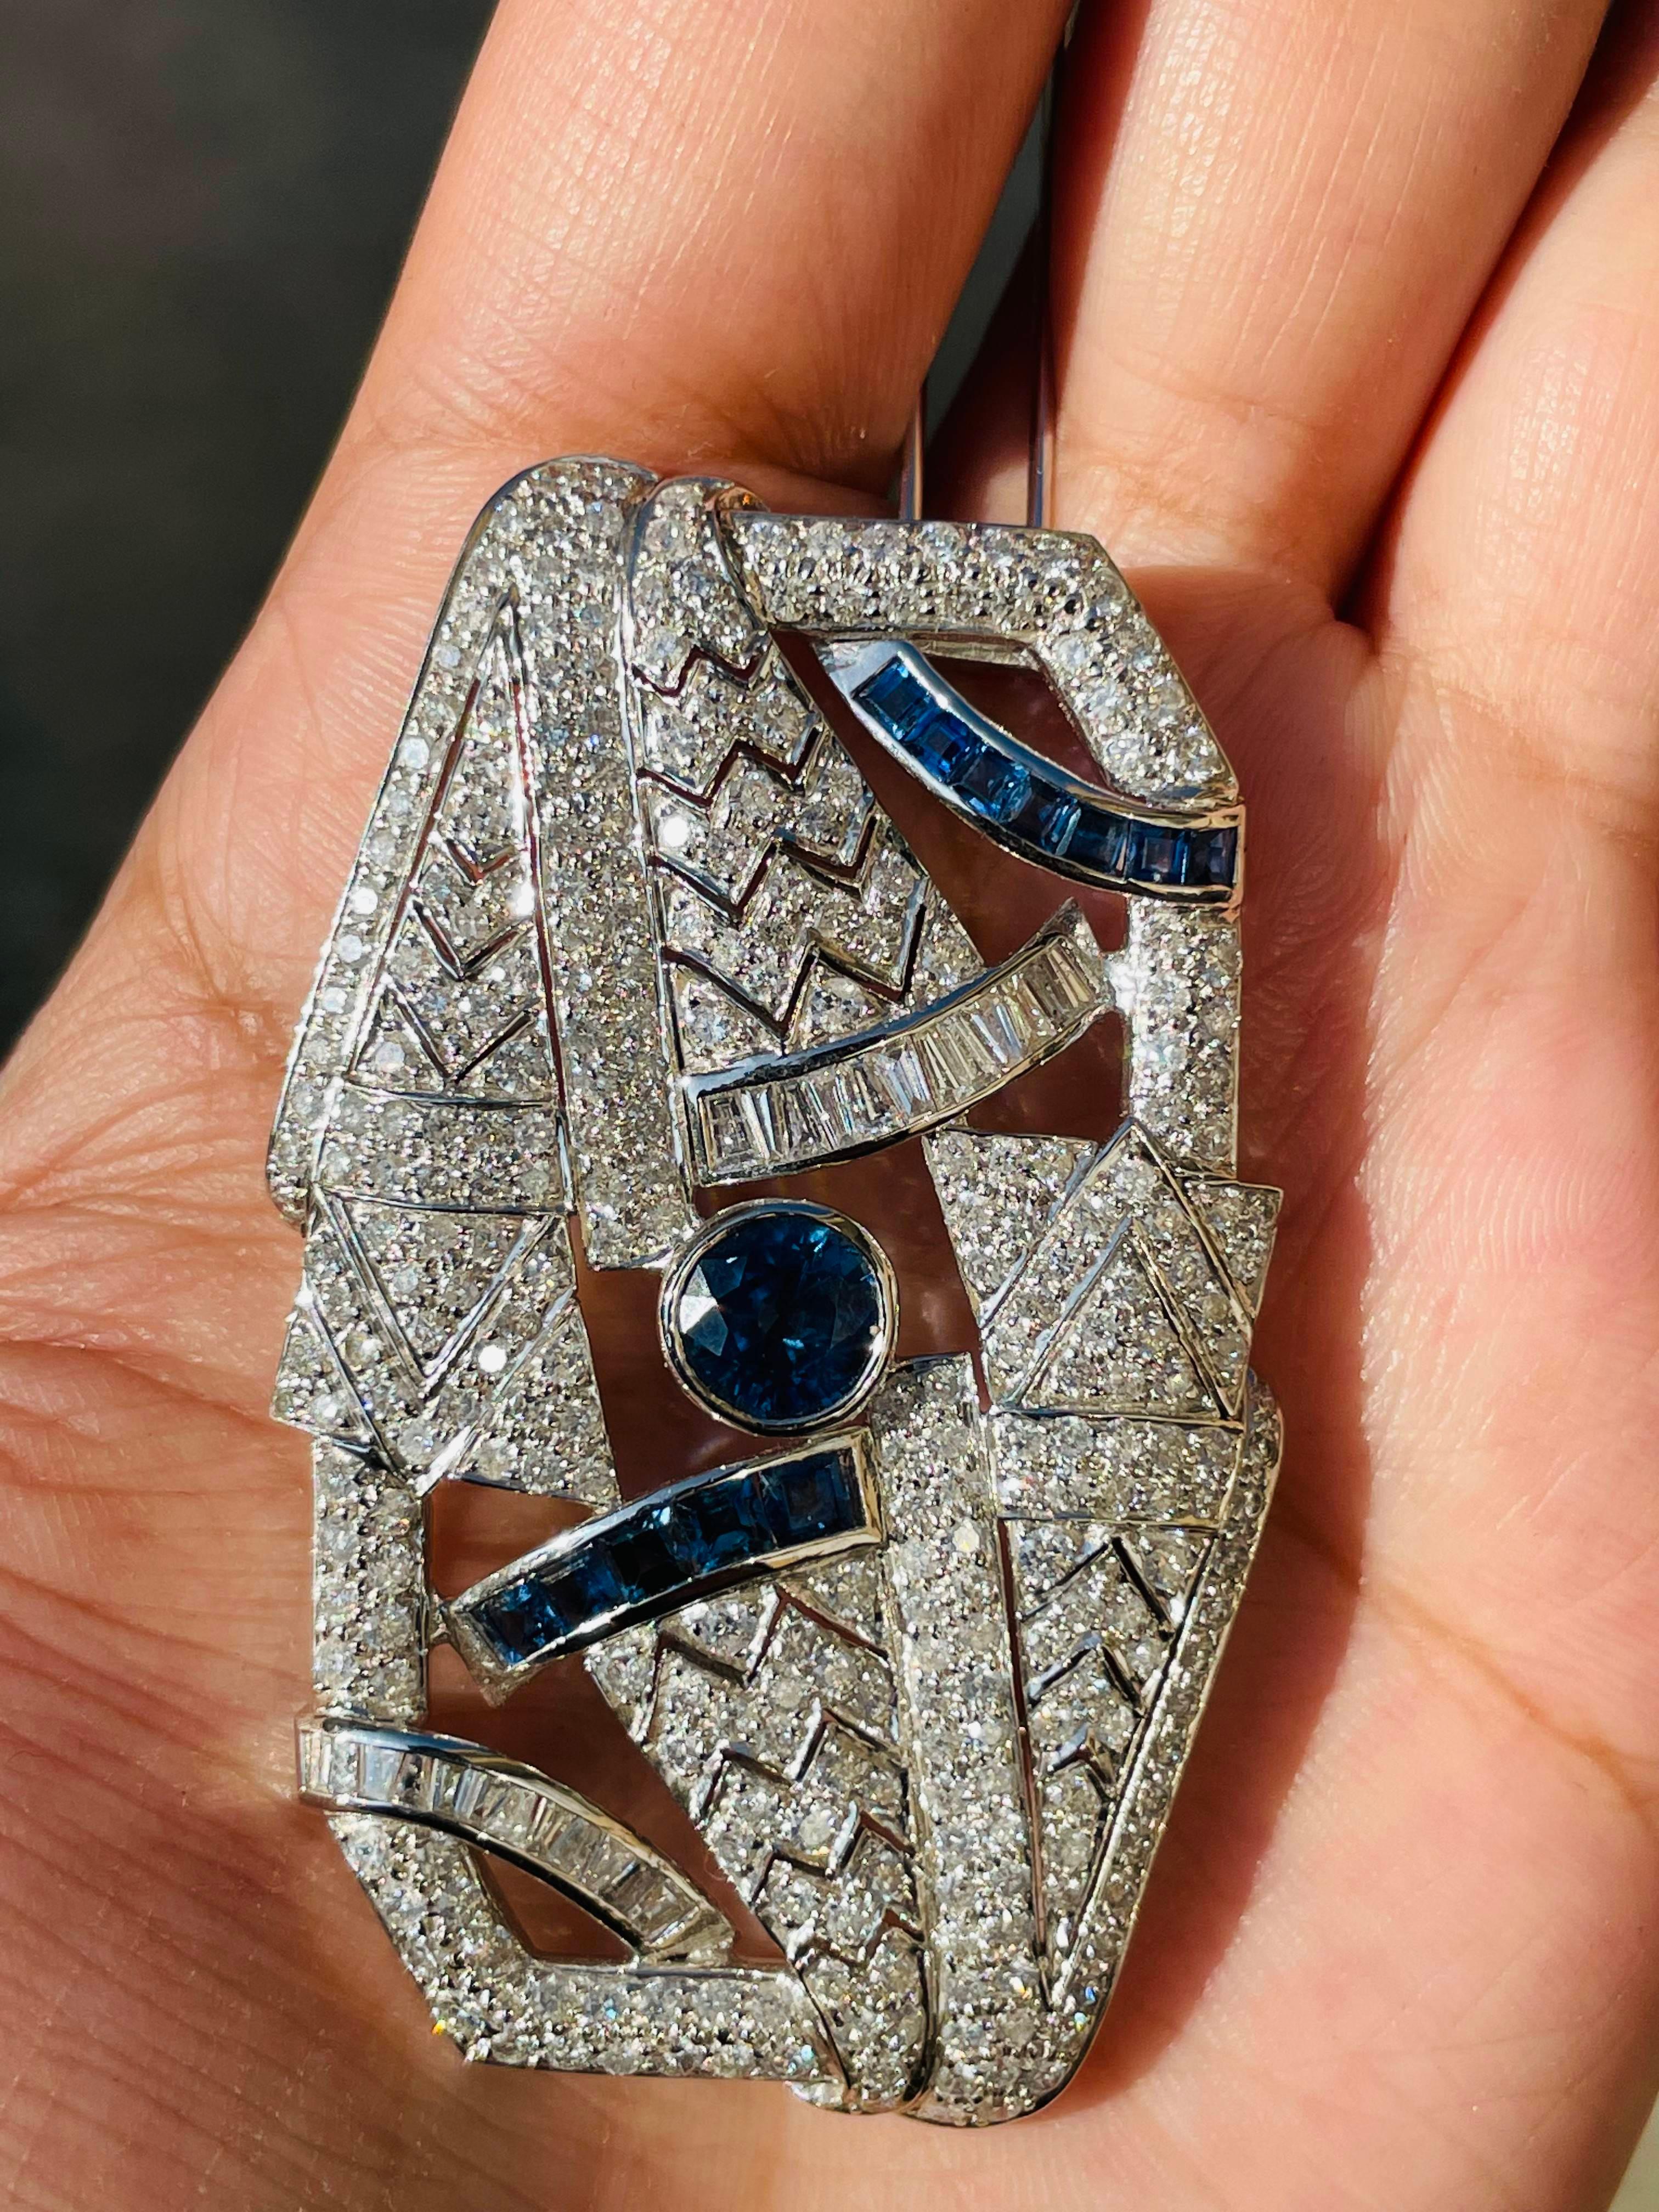  Art Deco 5.96 CTW Diamond and 3.9 CTW Sapphire Brooch 18k Solid White Gold In New Condition For Sale In Houston, TX